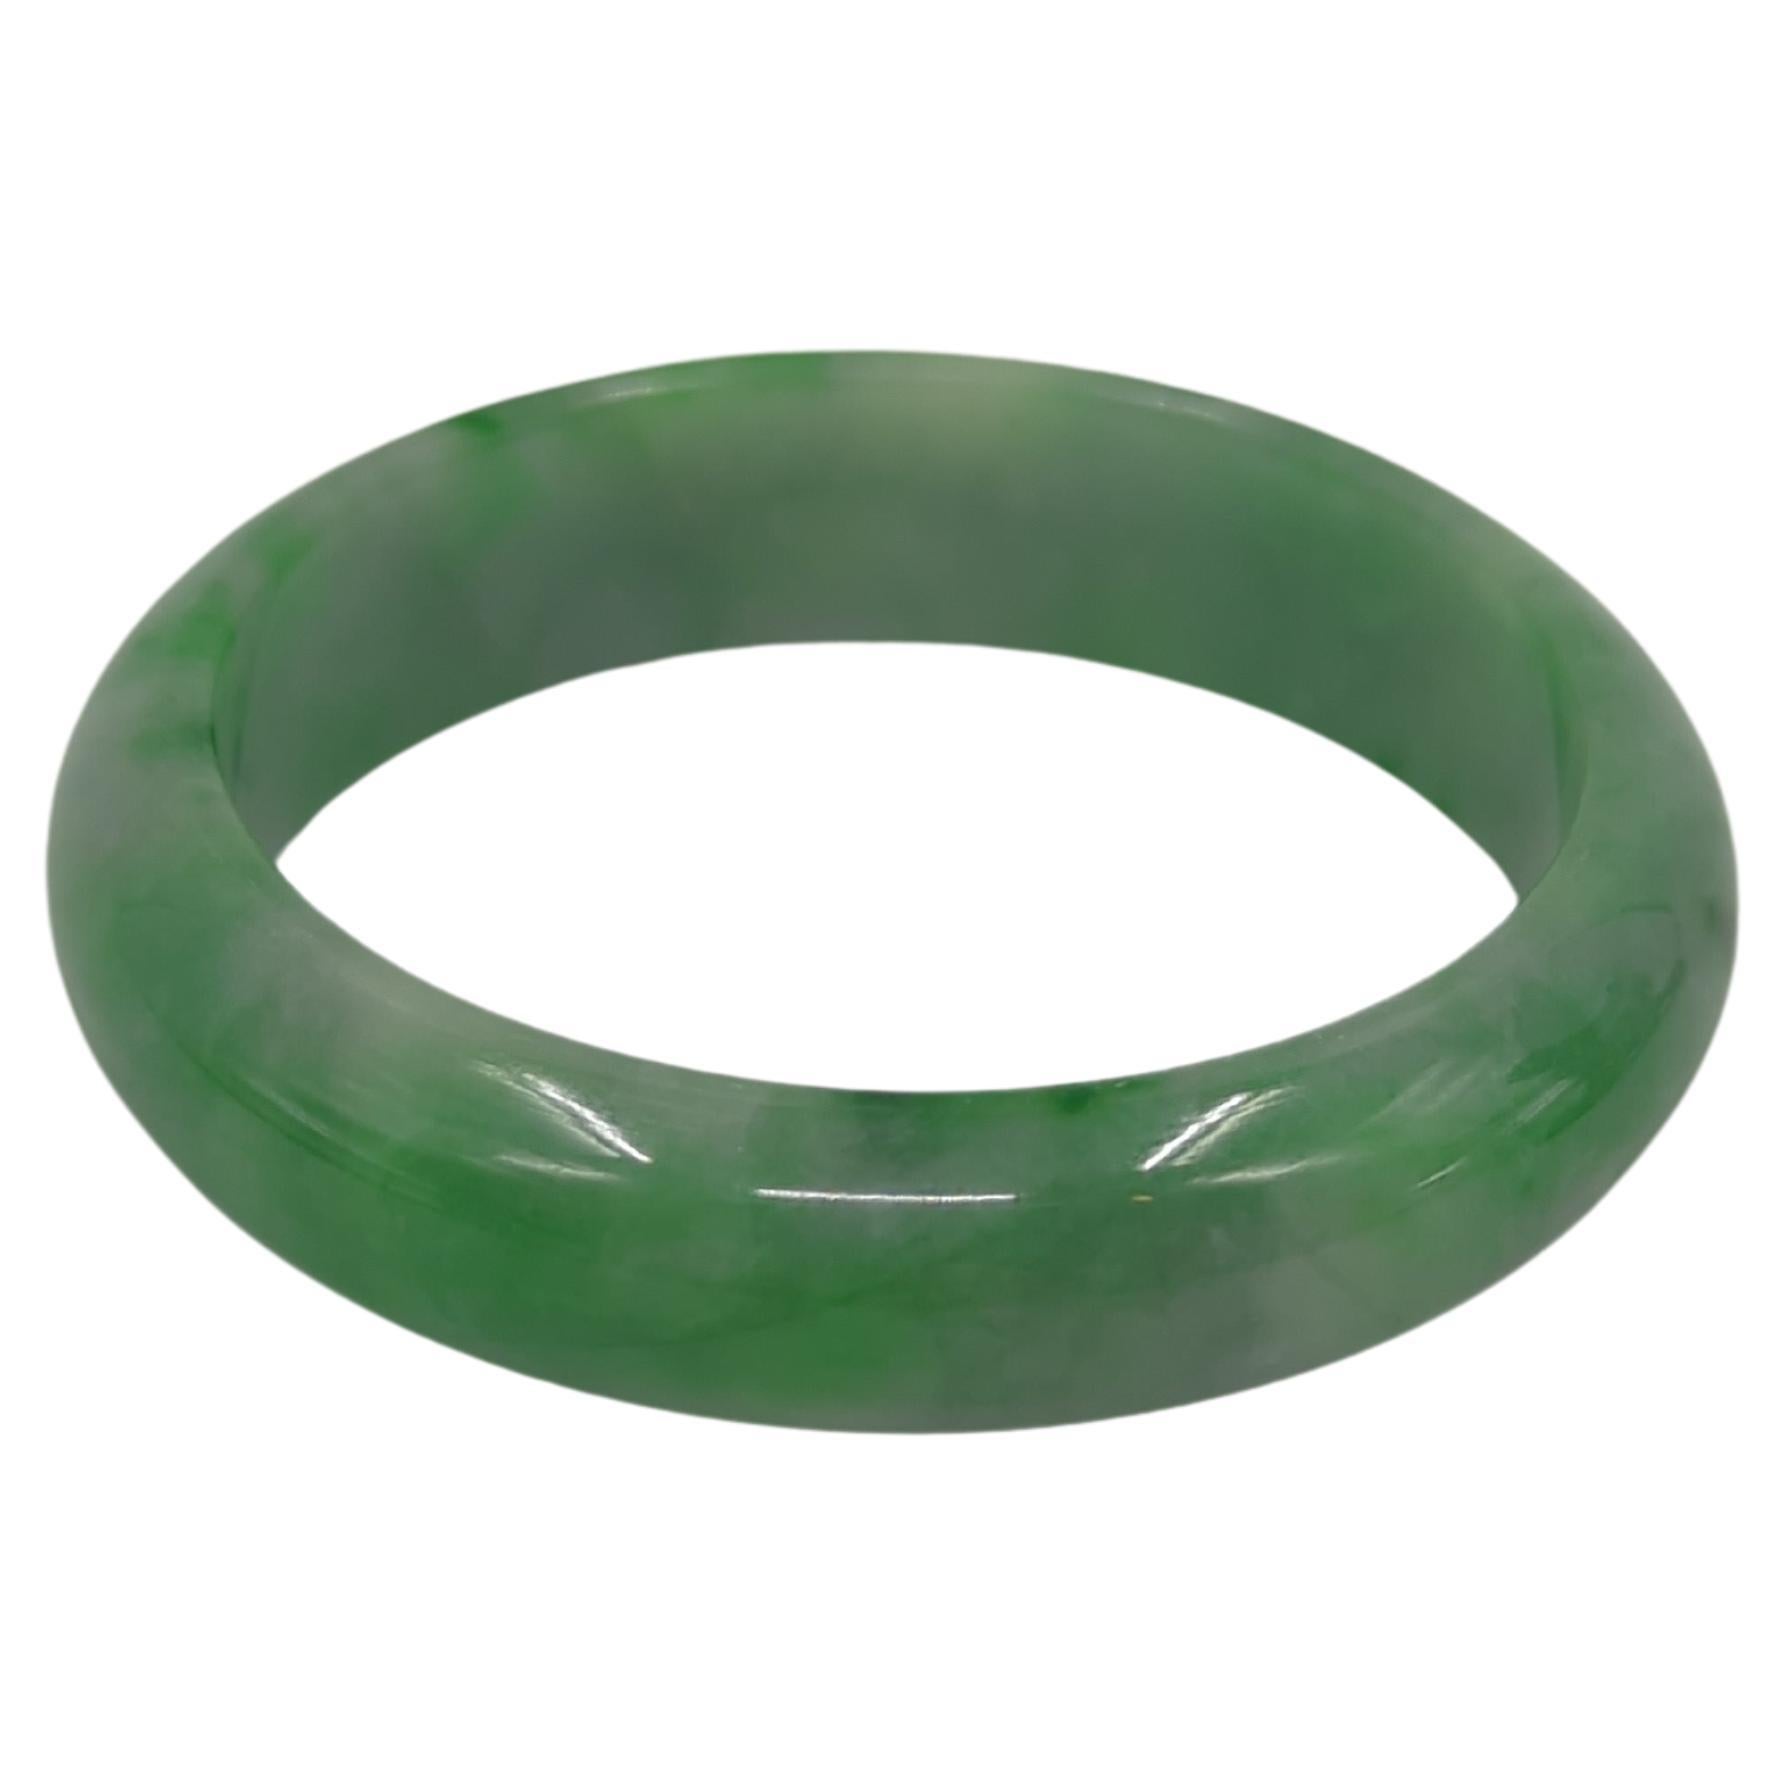 Round Cut Chinese Carved Translucent Mottled Emerald Green Spots Jadeite Bangle 57.5 mm ID For Sale